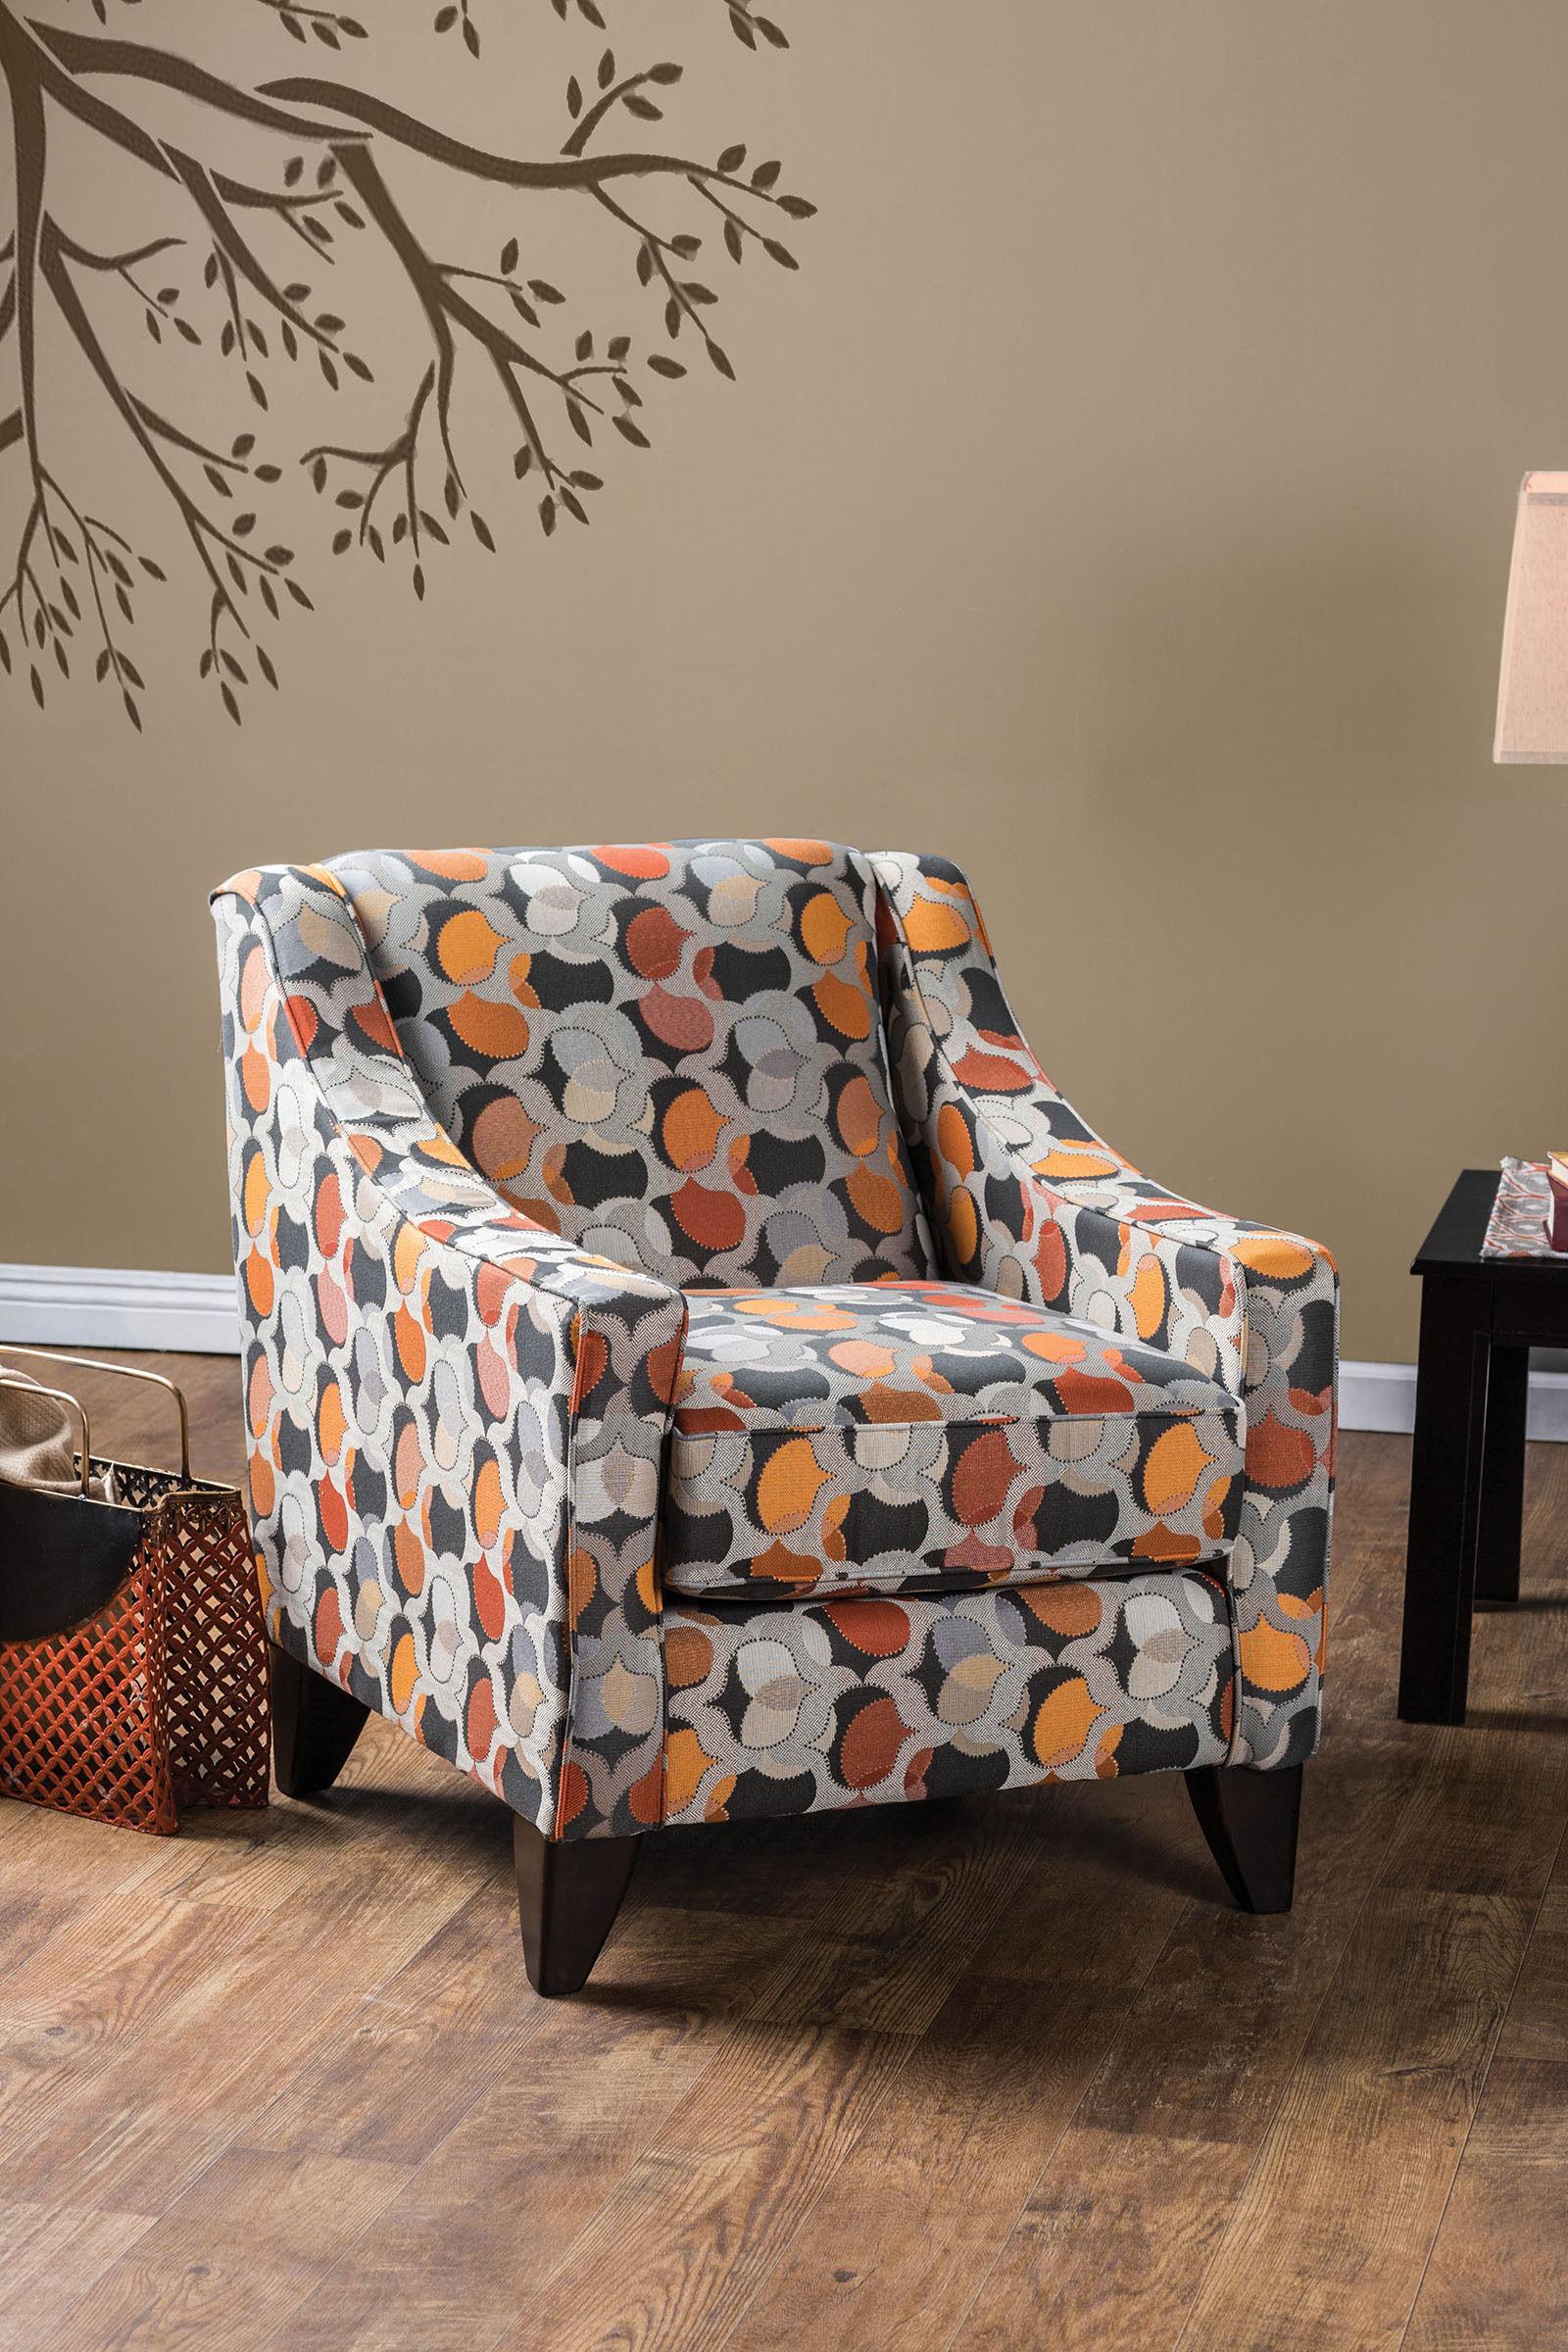 Transitional Arm Chair PENNINGTON SM1112-CH SM1112-CH in Multi-Color Patterned Fabric